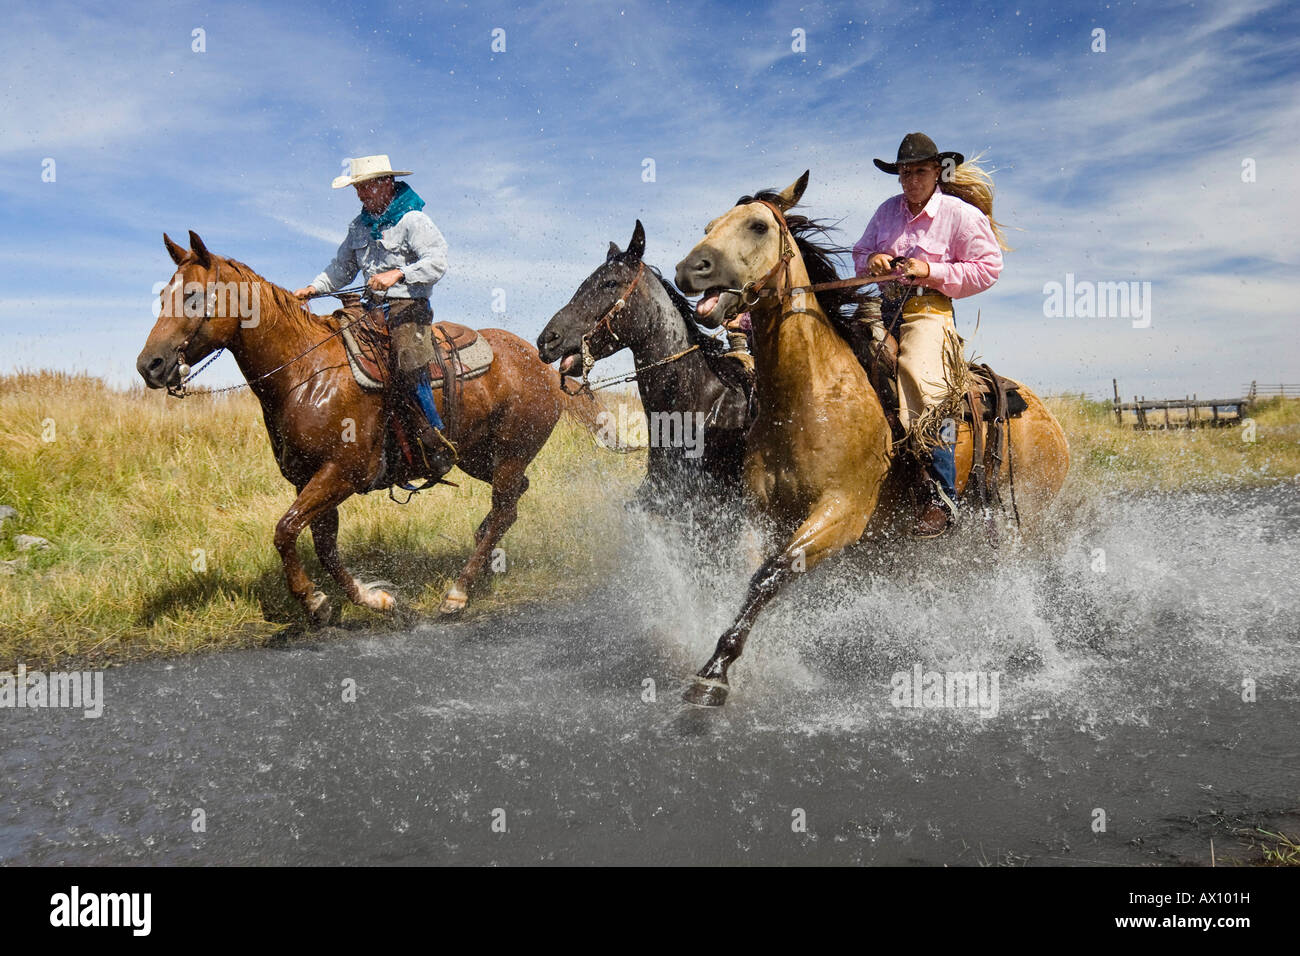 Cowgirl and cowboys riding in water, Oregon, USA Stock Photo